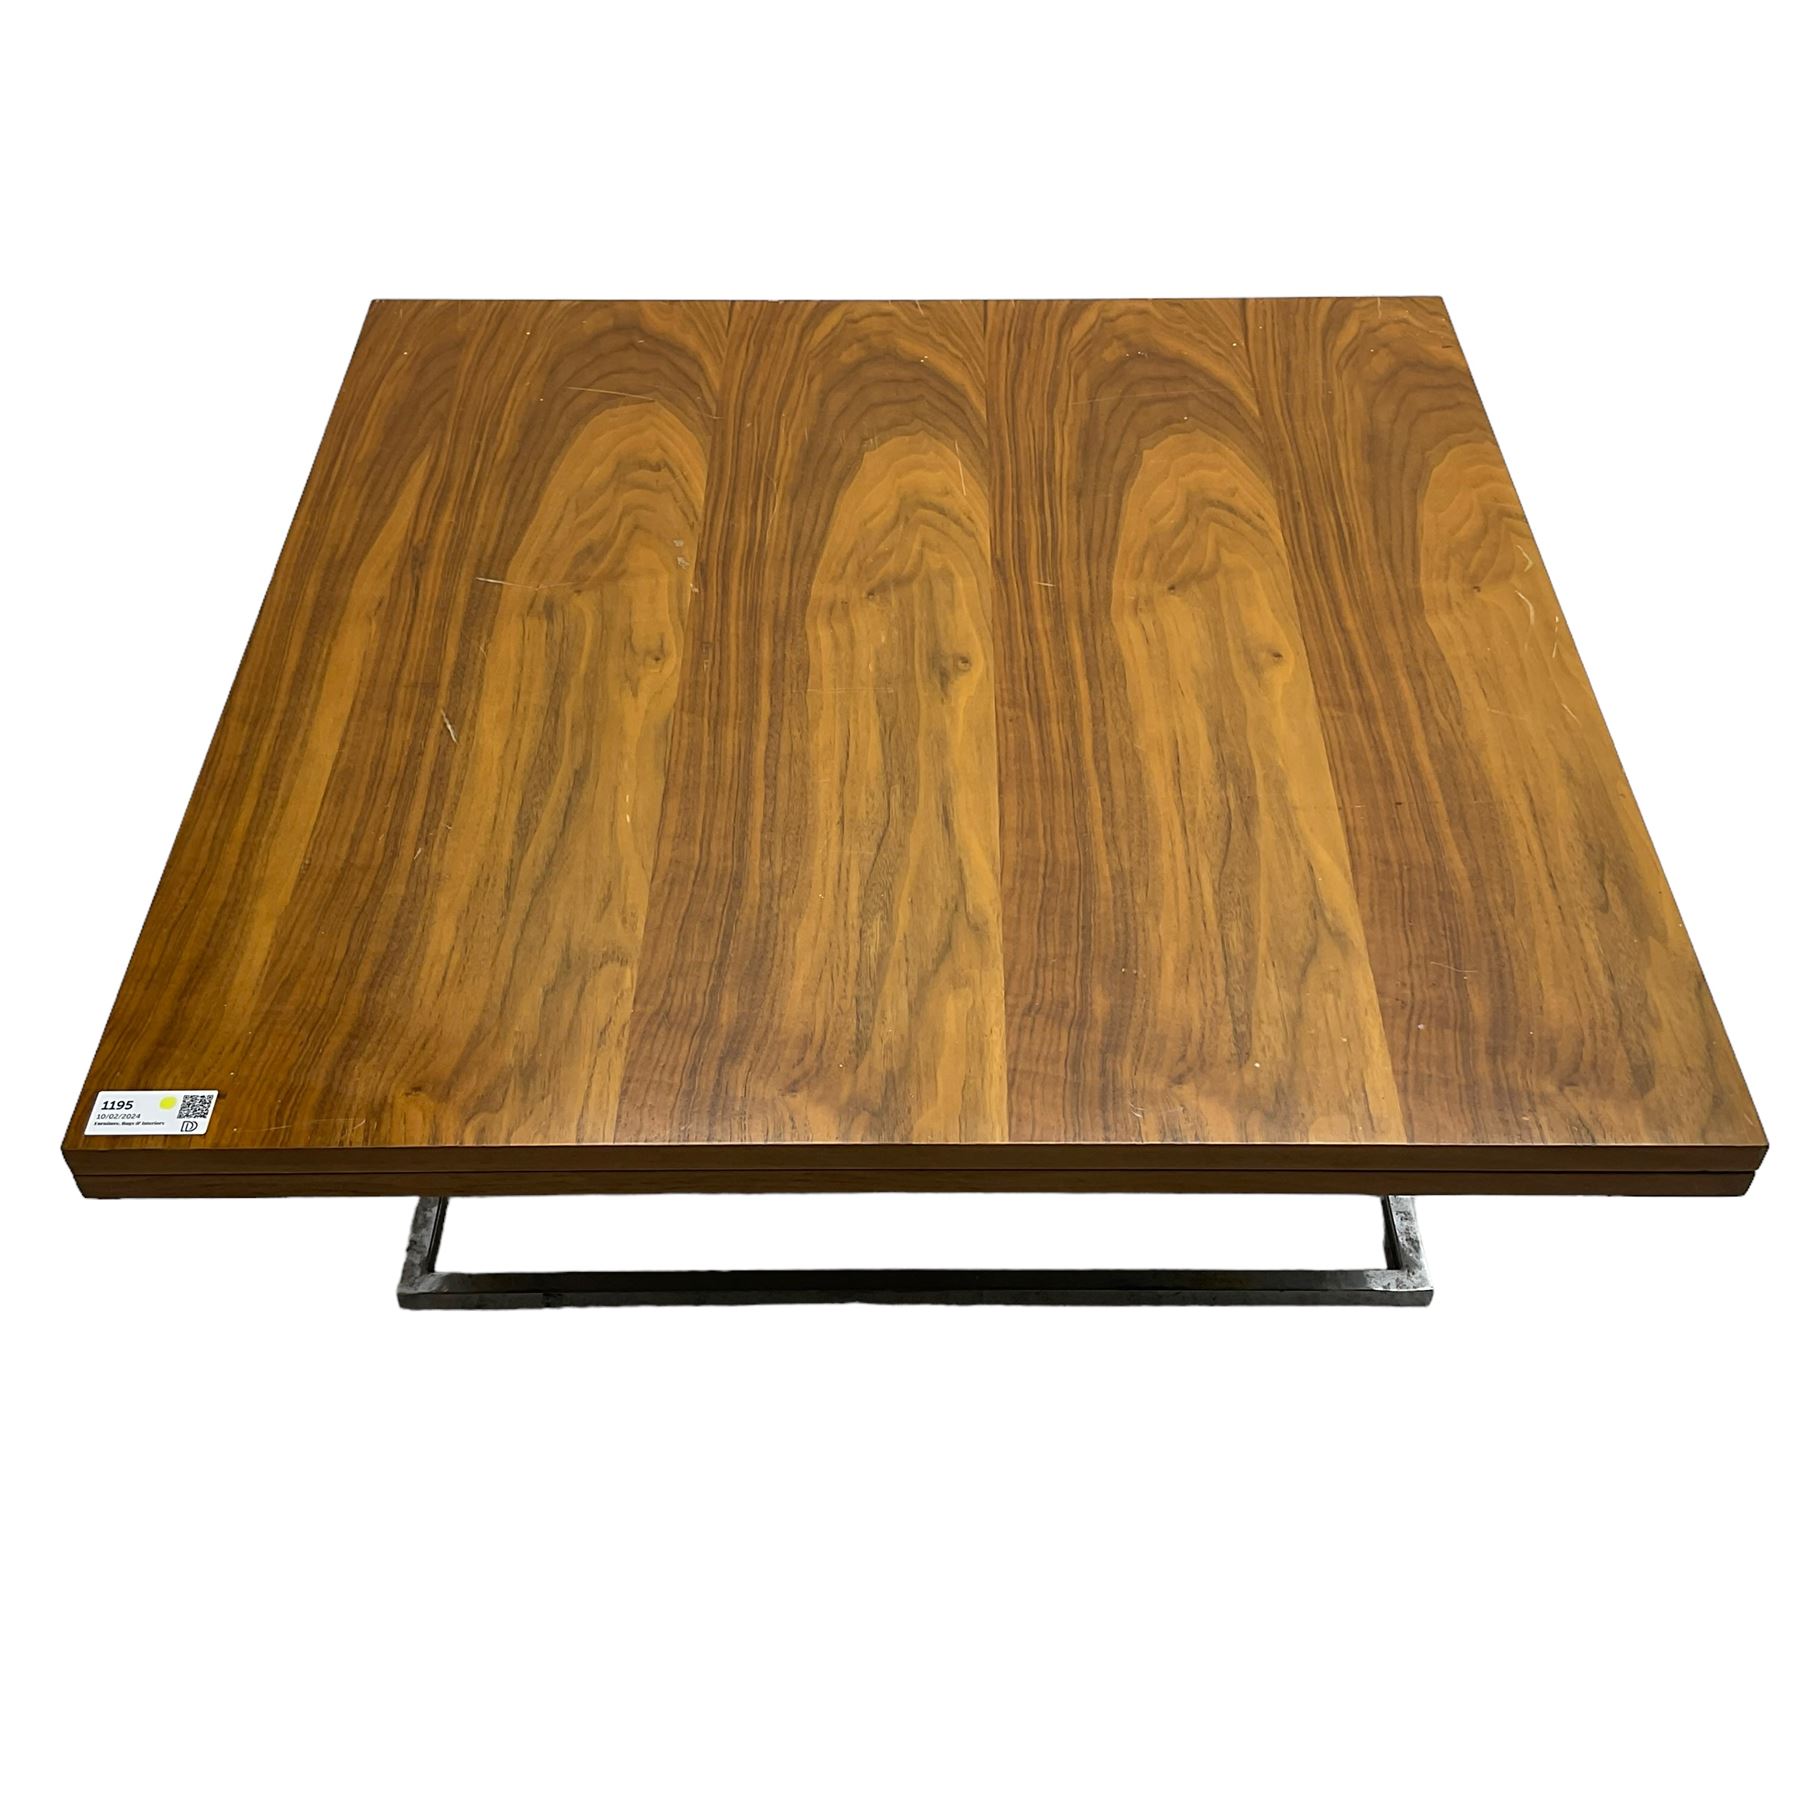 Contemporary walnut metamorphic coffee or dining table - Image 4 of 7